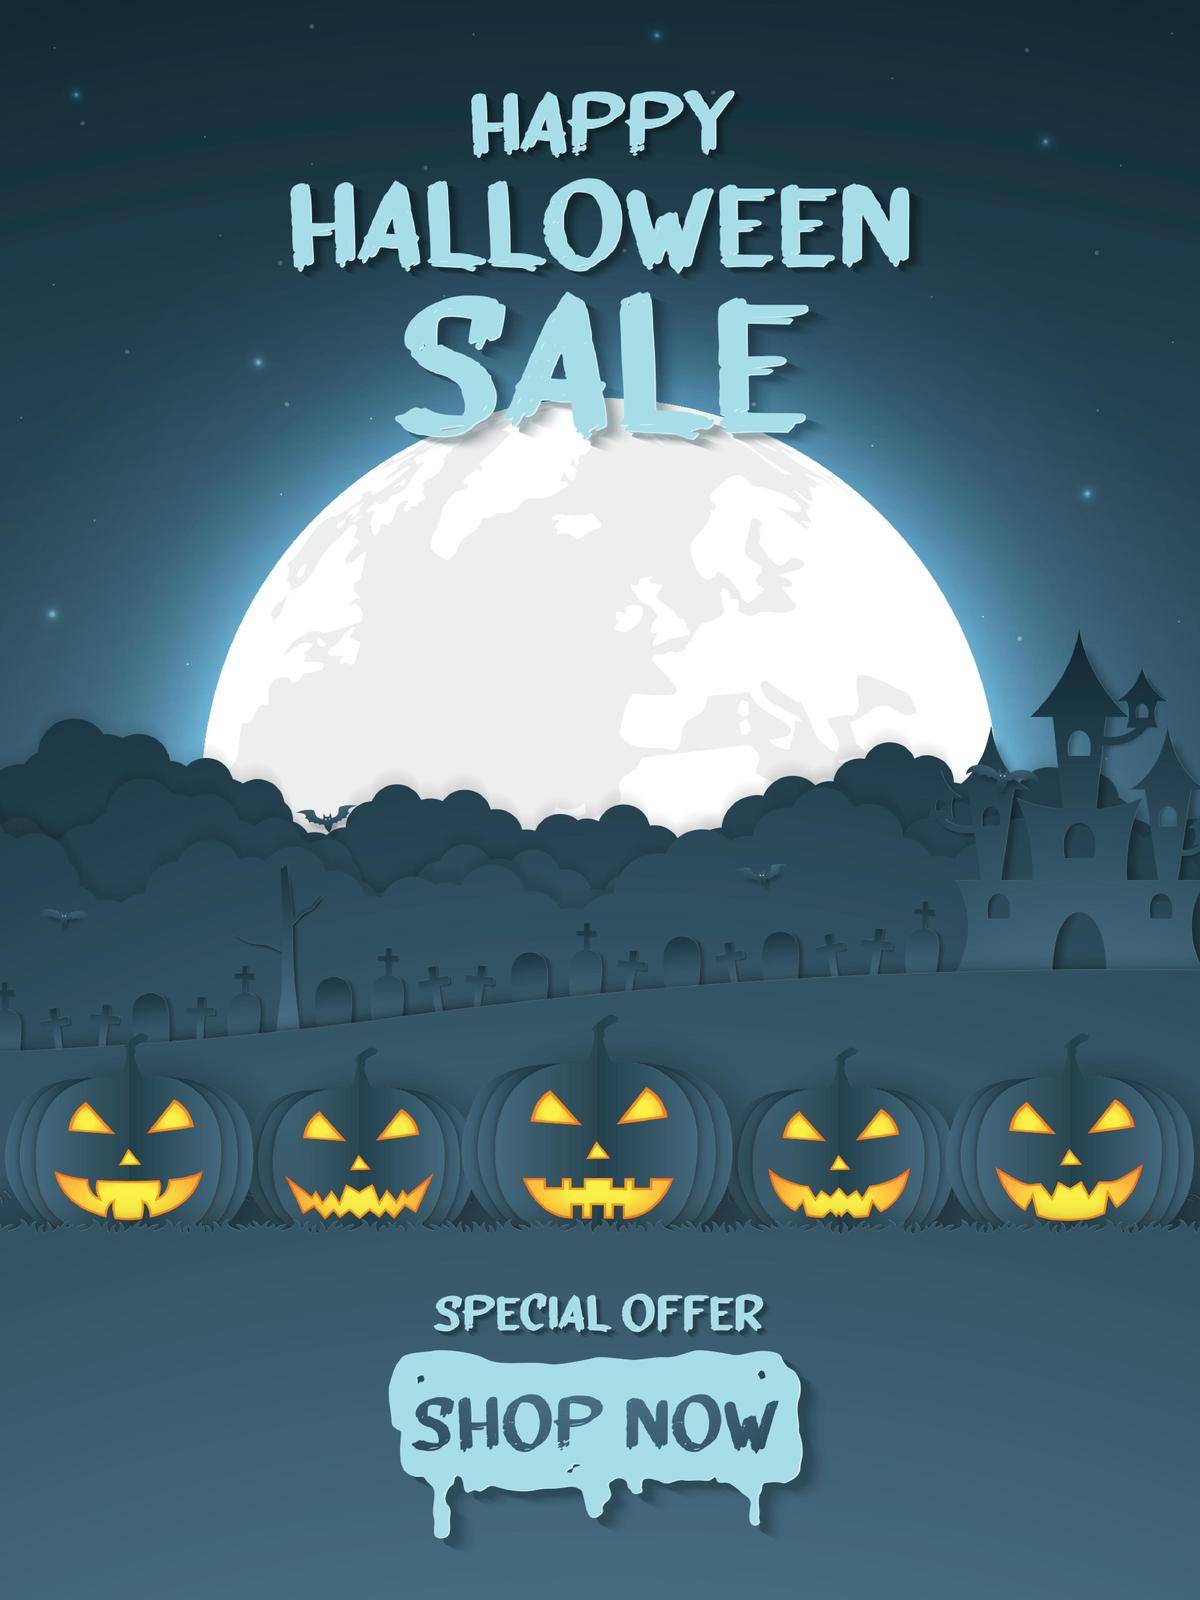 Happy Halloween sale banner, pumpkin head with castle, graveyard on the hill and full moon, paper art style